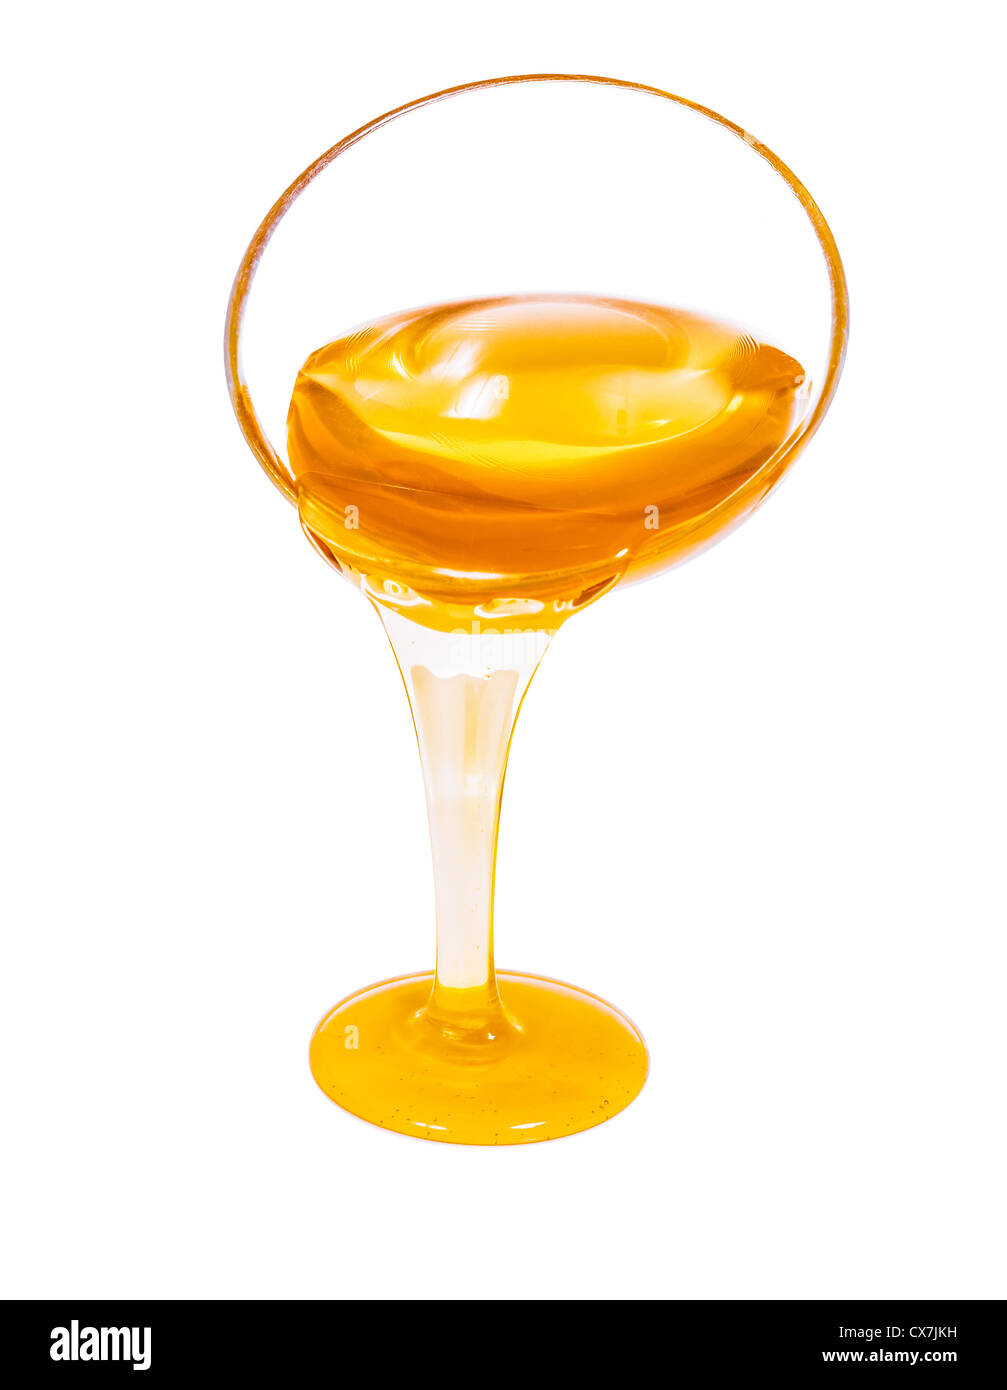 honey flow dropping from glass cup isolated on white Stock Photo